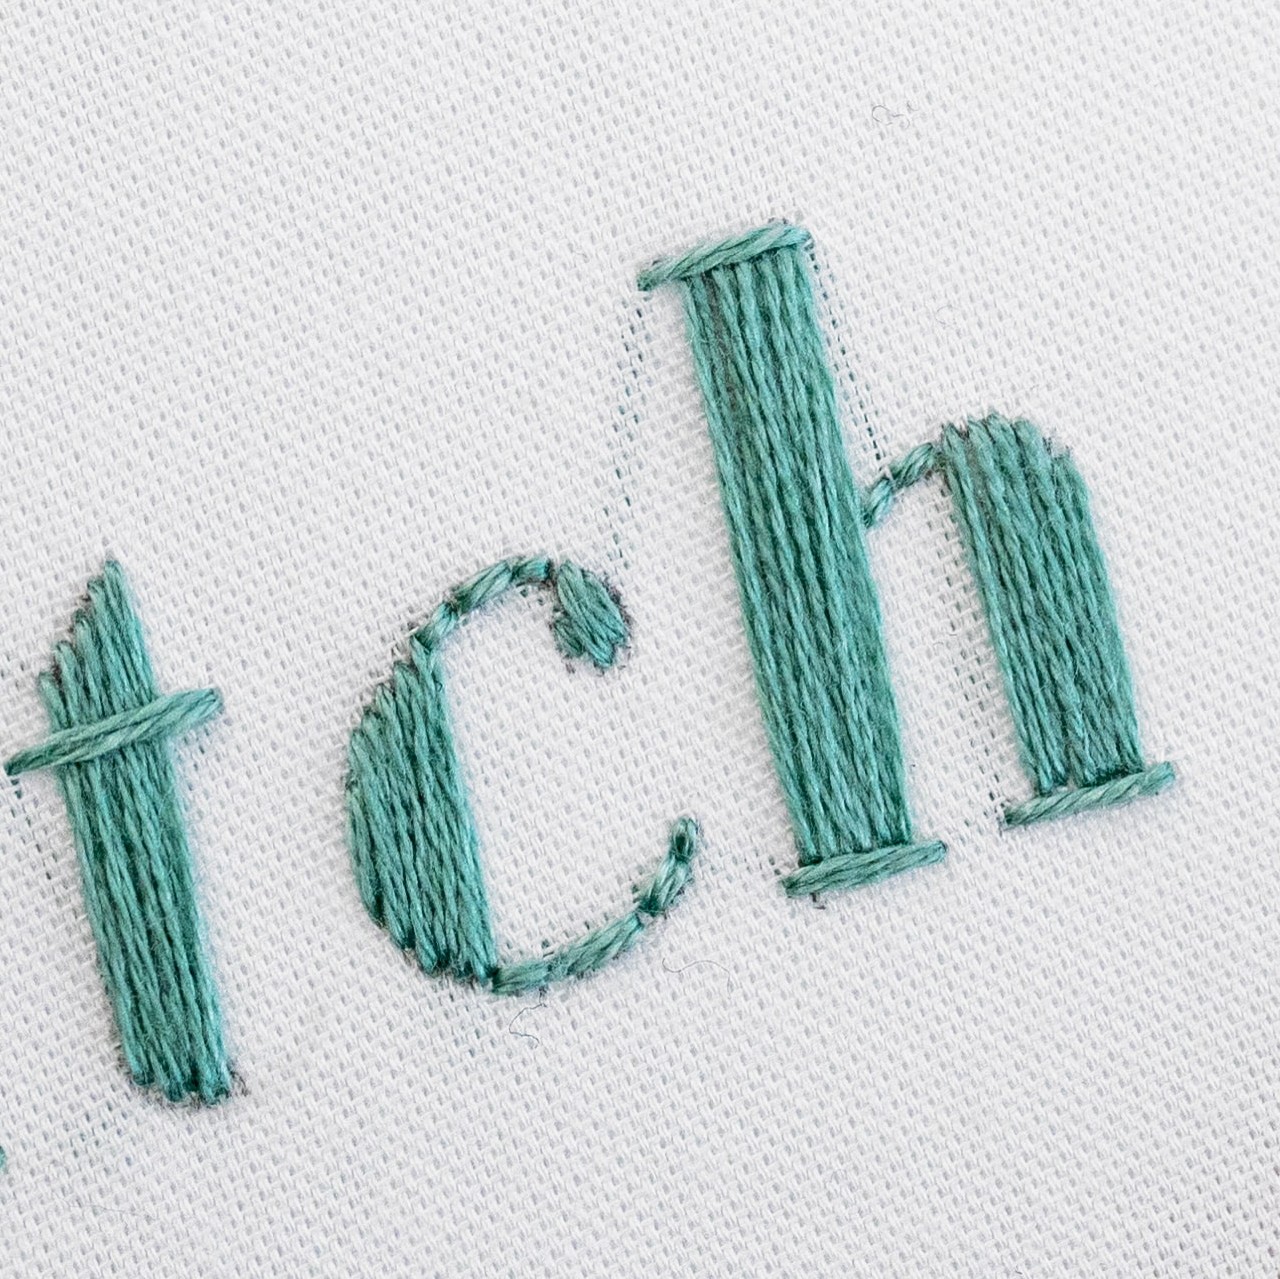 This is the front of the lettering 'tch.'